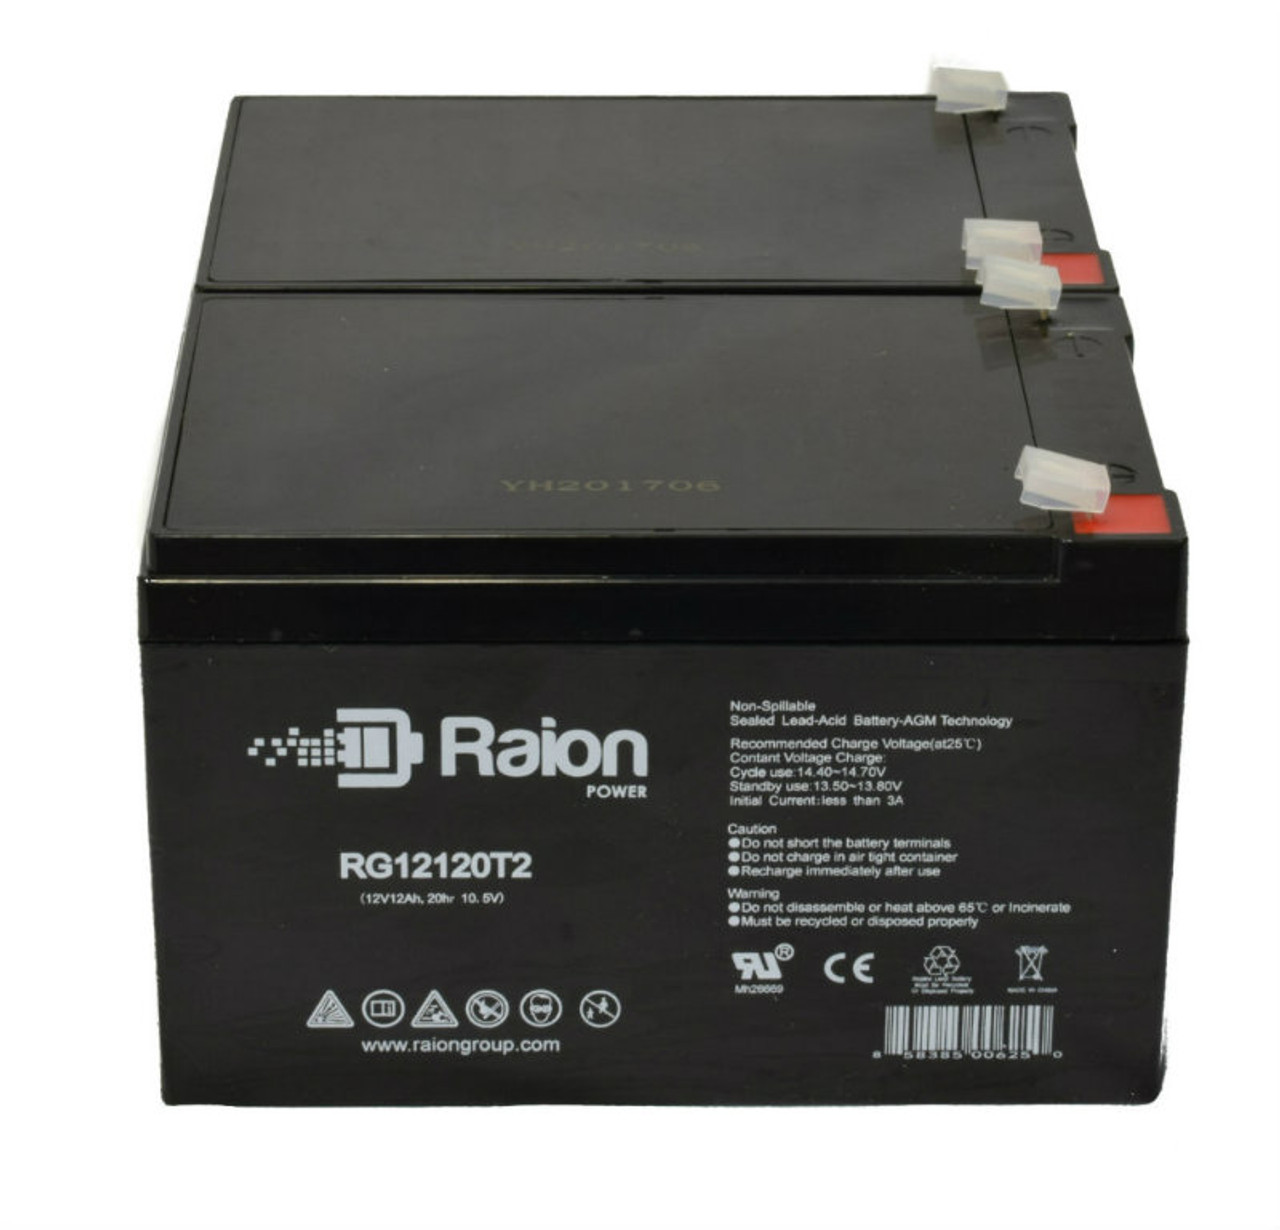 Raion Power 12V 12Ah Replacement Alarm Security System Battery for Altronix AL300ULXPD16 - 2 Pack